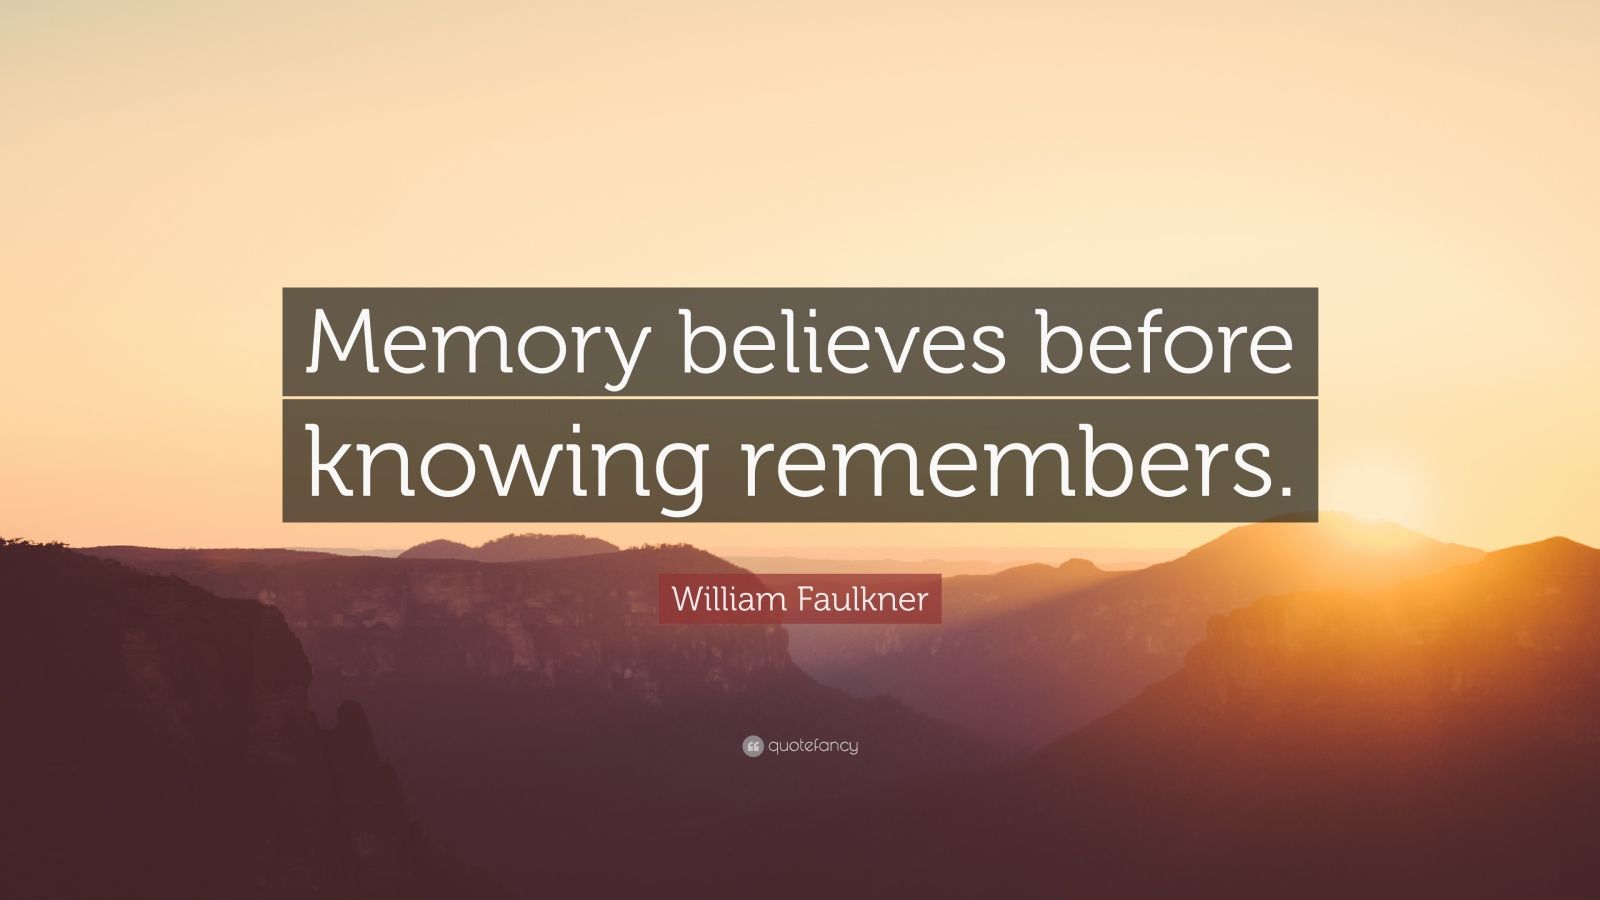 william faulkner quote: "memory believes before knowing remember